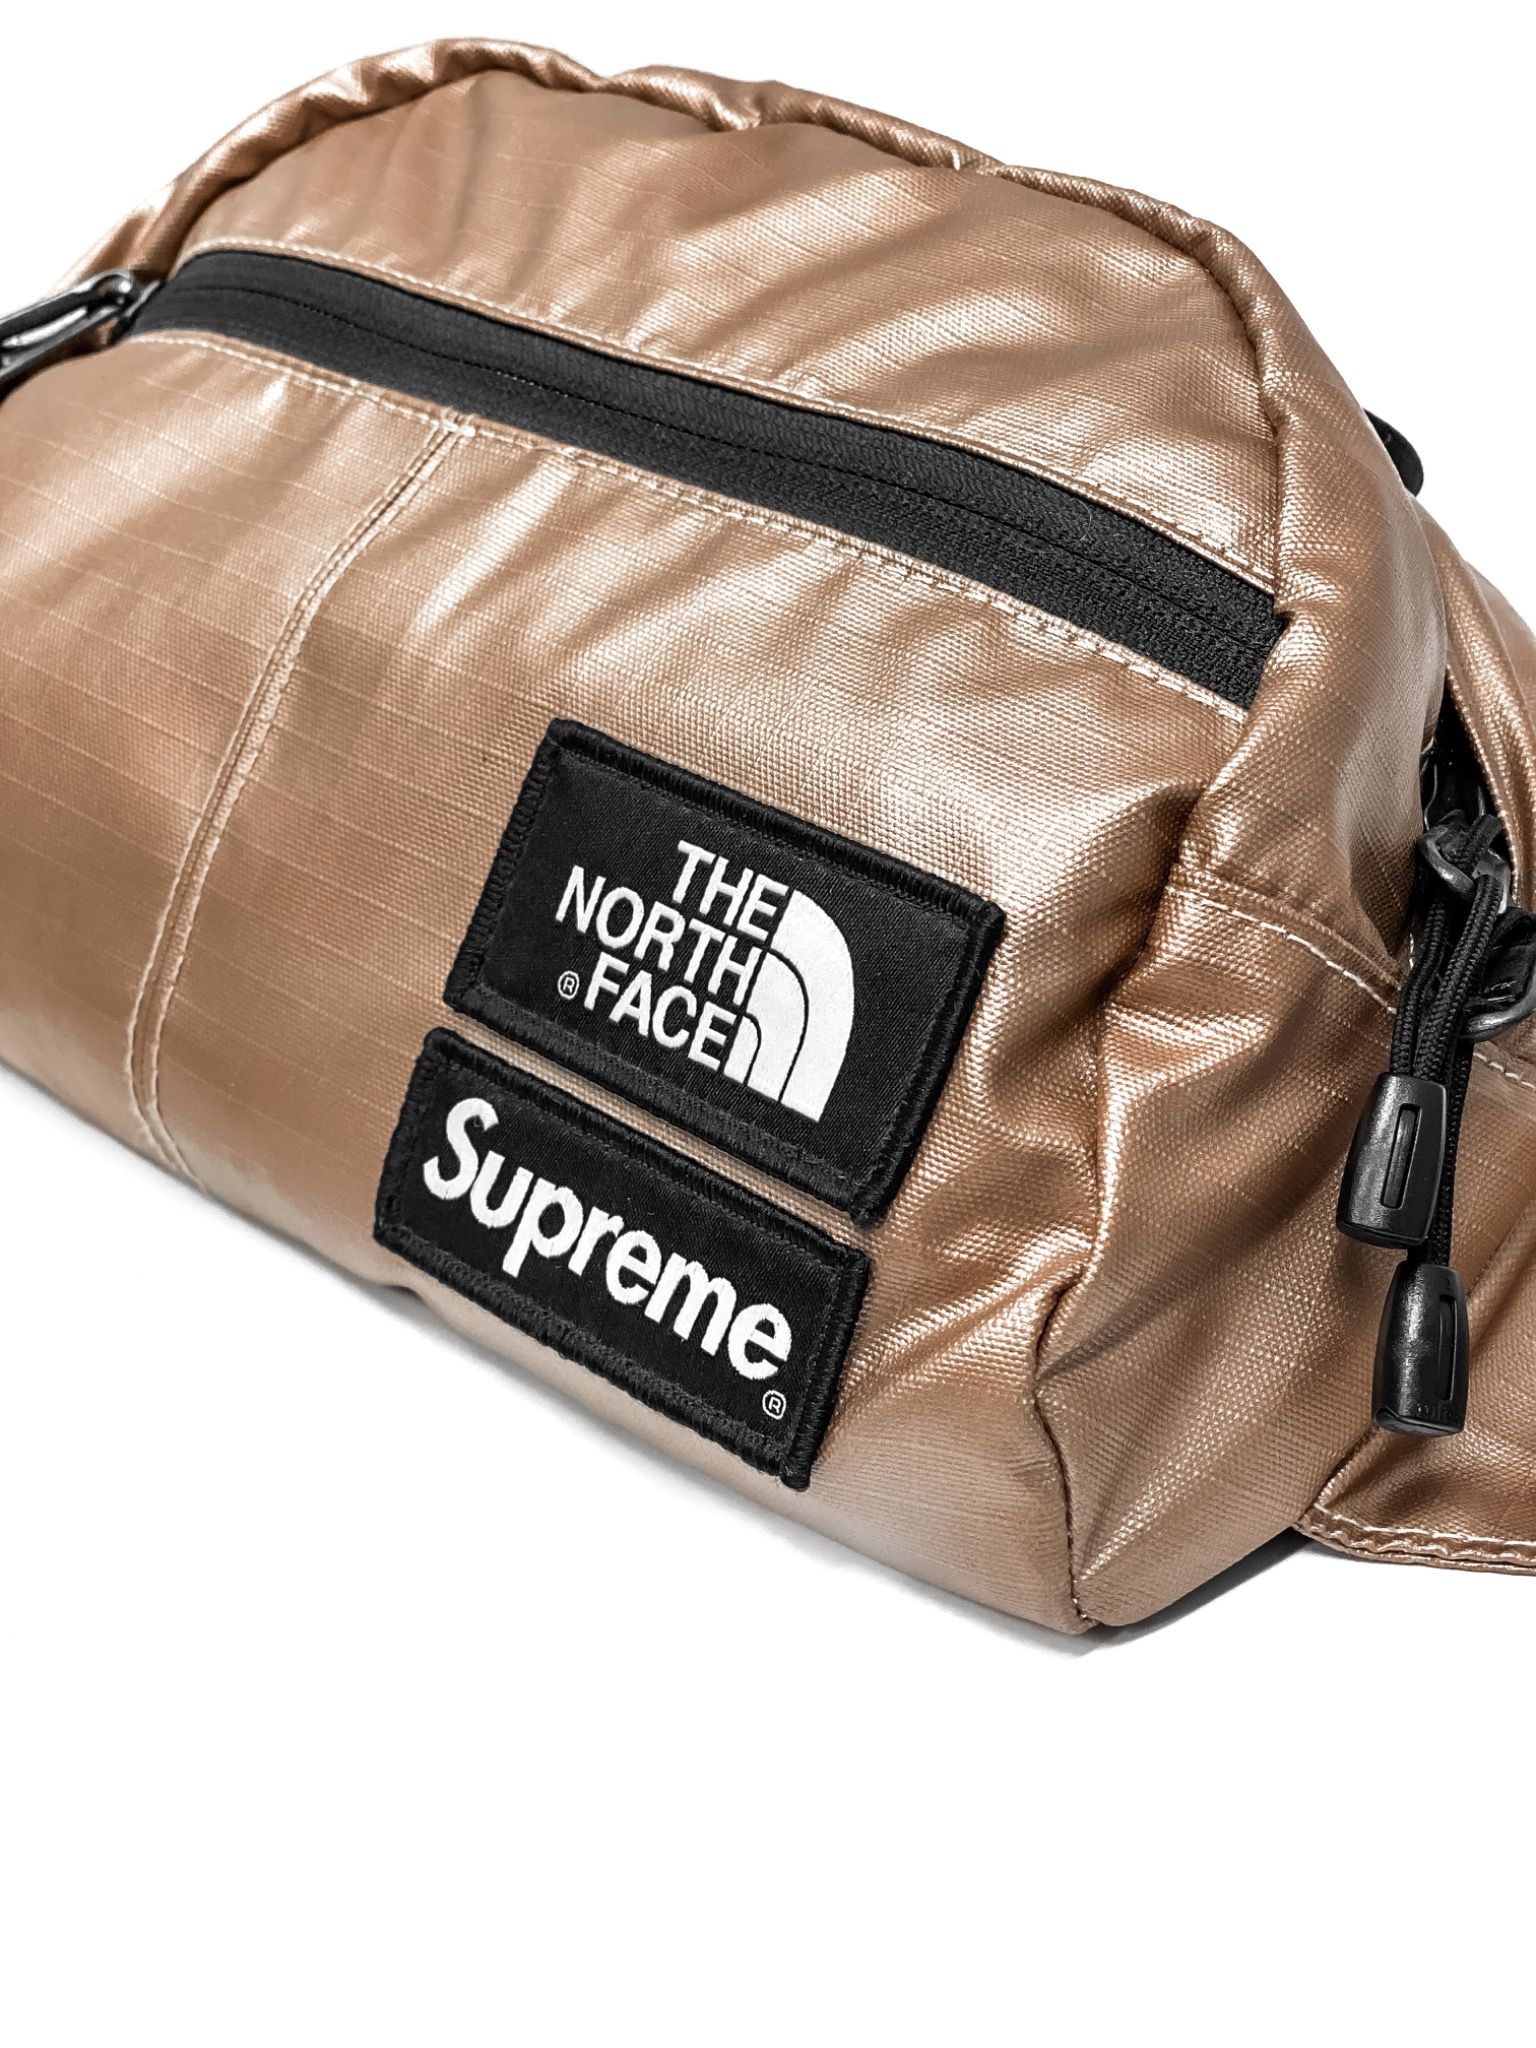  Supreme x The North Face Lumbar Pack Leather Roo || (Metallic) 